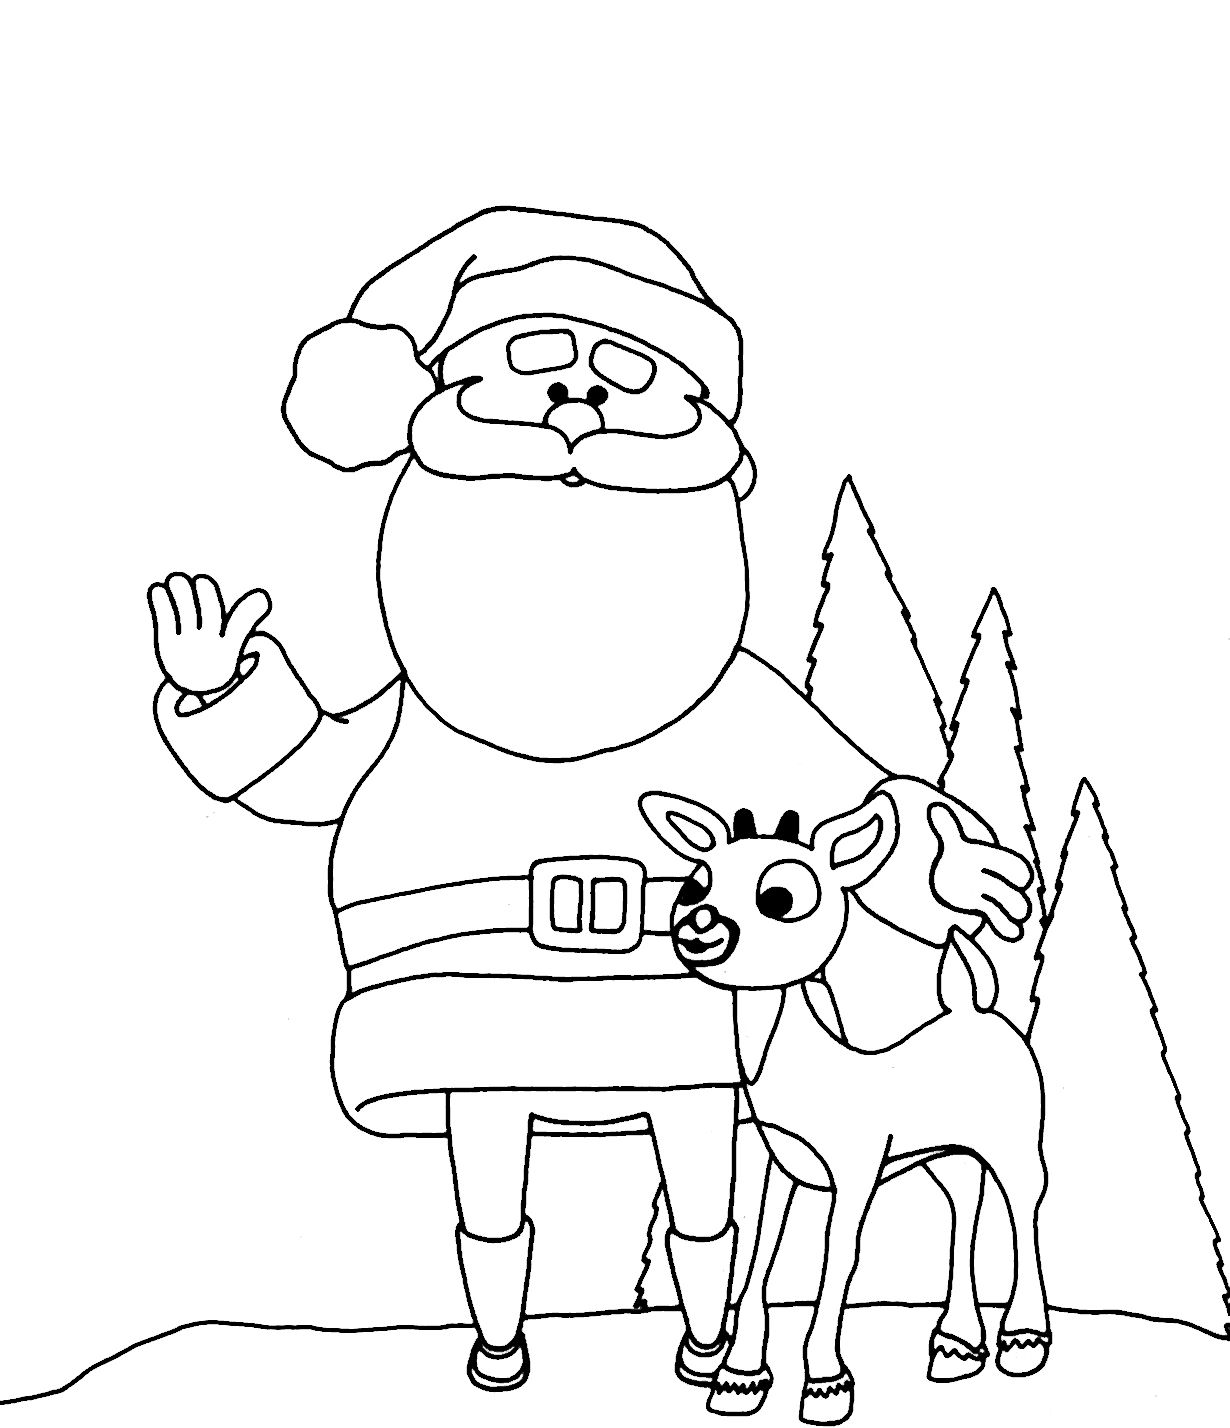 Free santa coloring pages and printables for kids